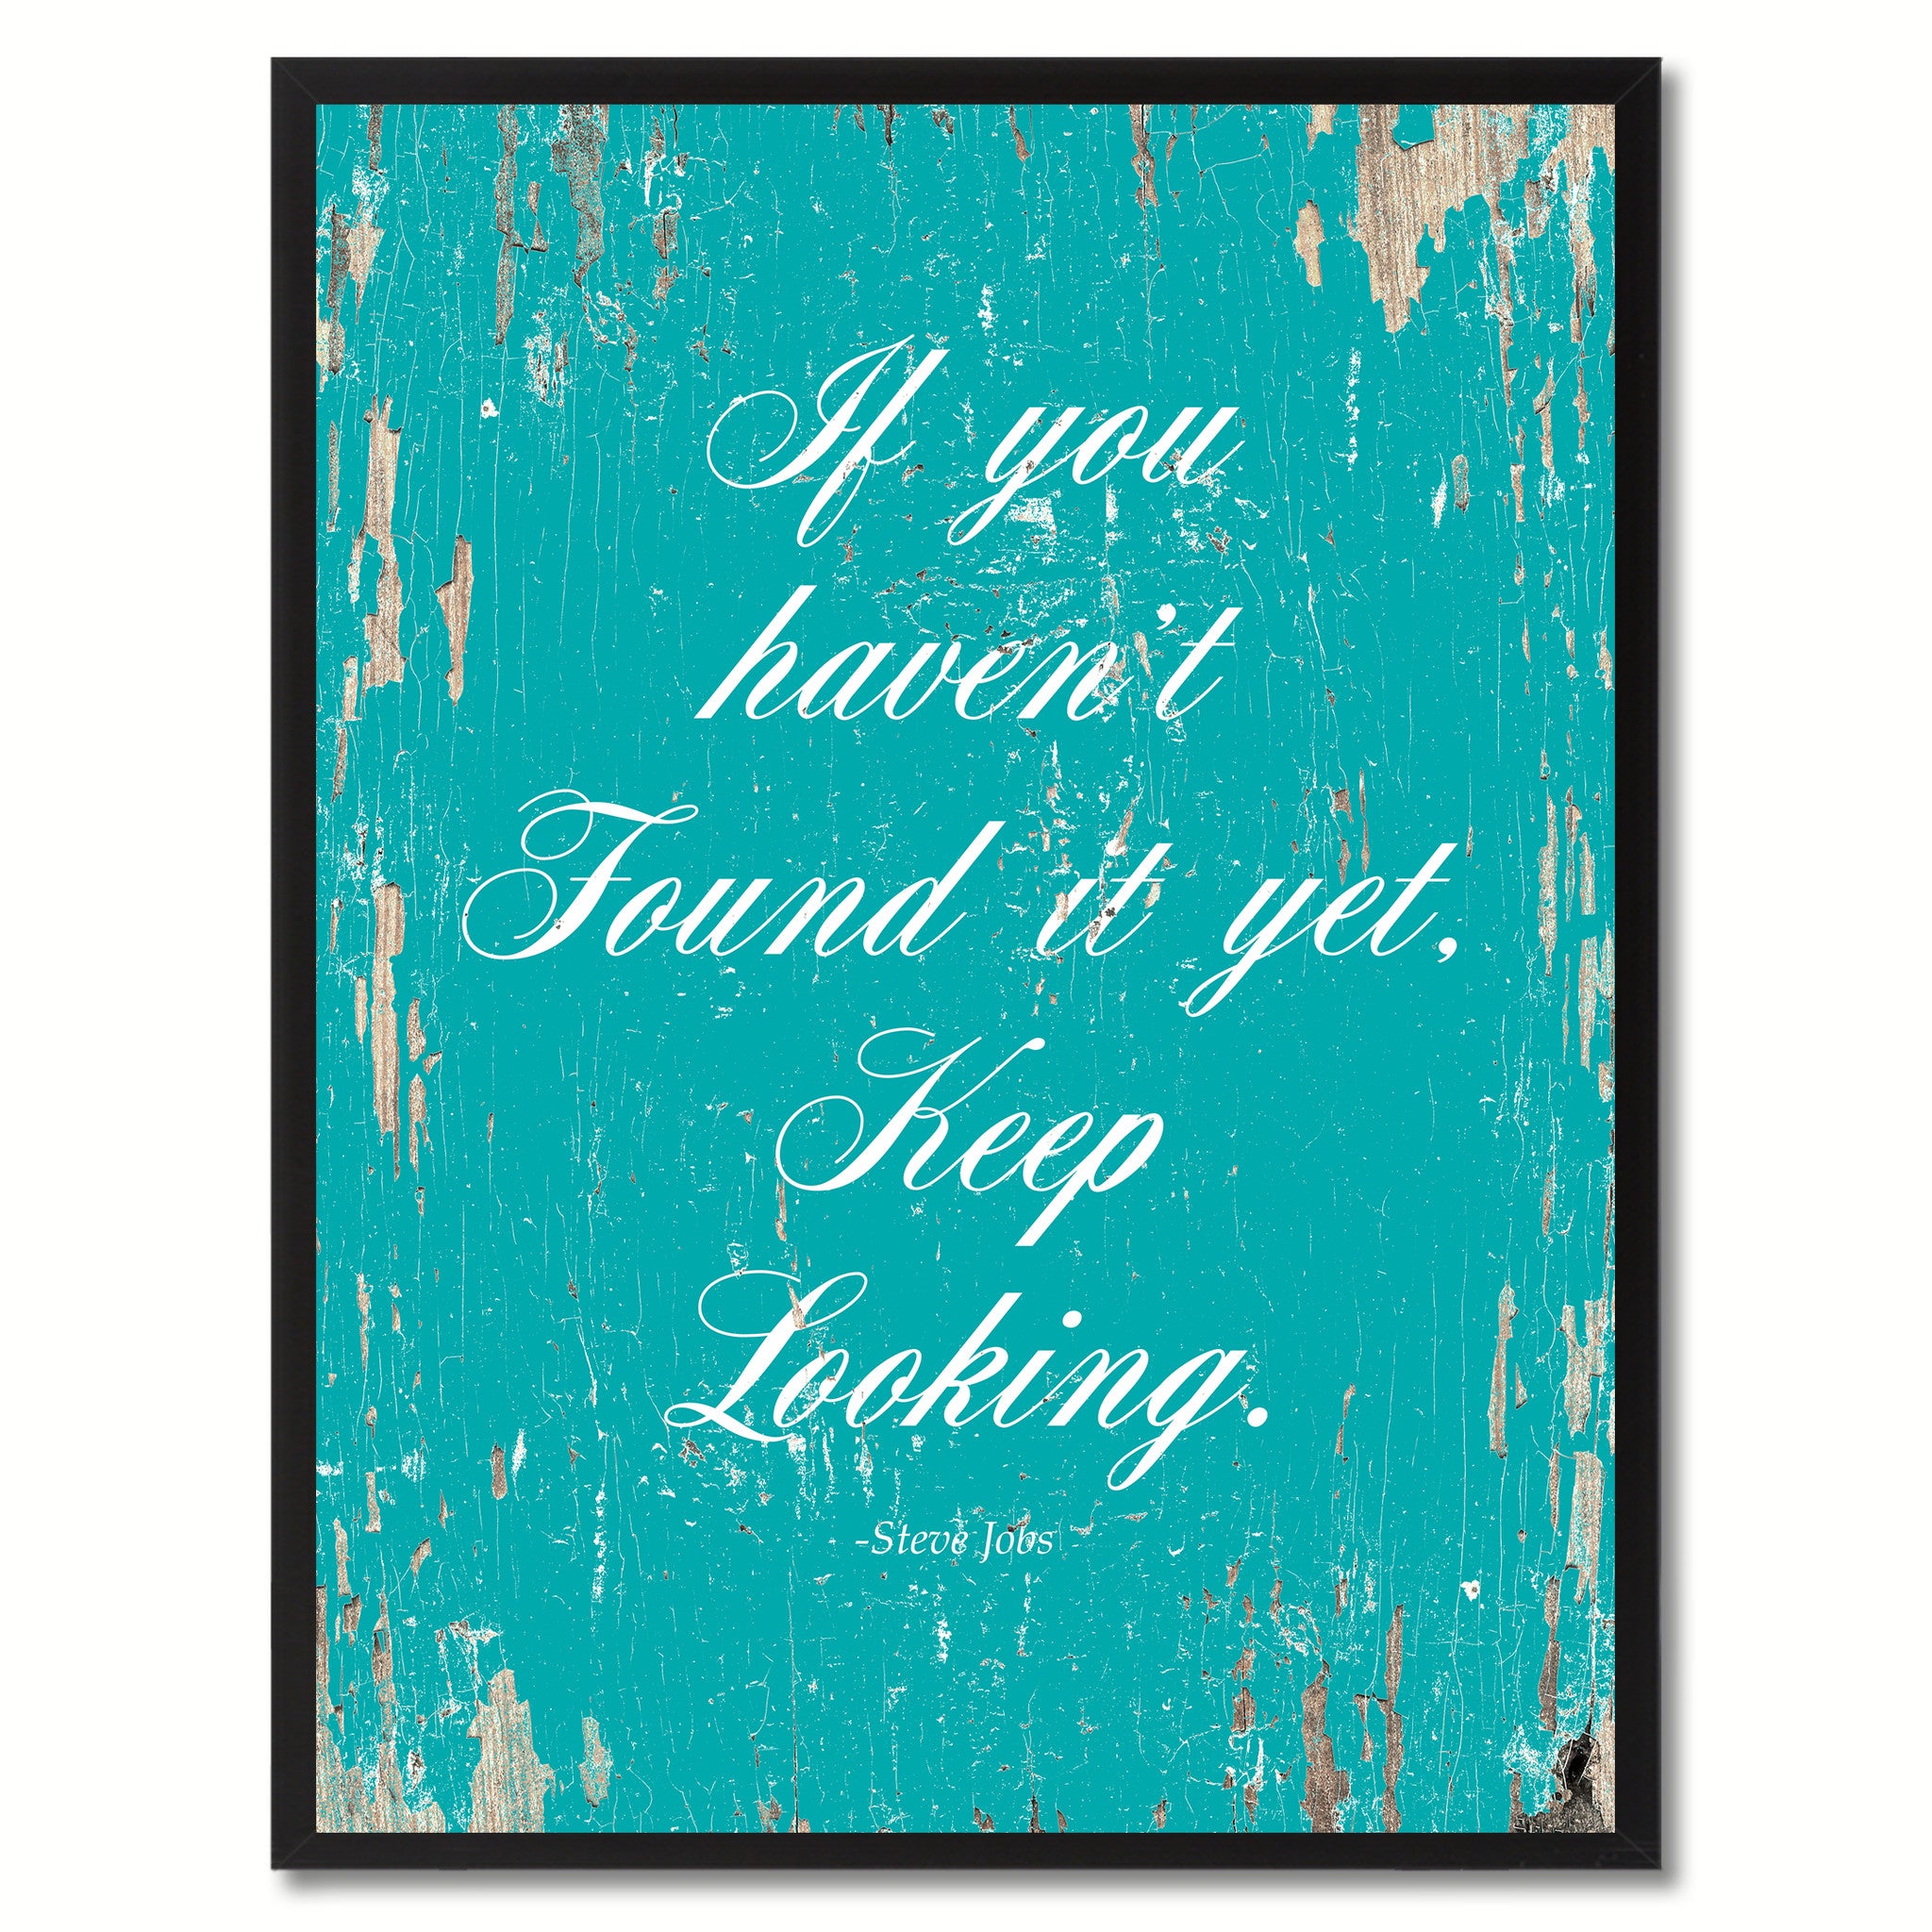 If you haven't found it yet keep looking - Steve Jobs Motivational Quote Saying Canvas Print with Picture Frame Home Decor Wall Art, Aqua